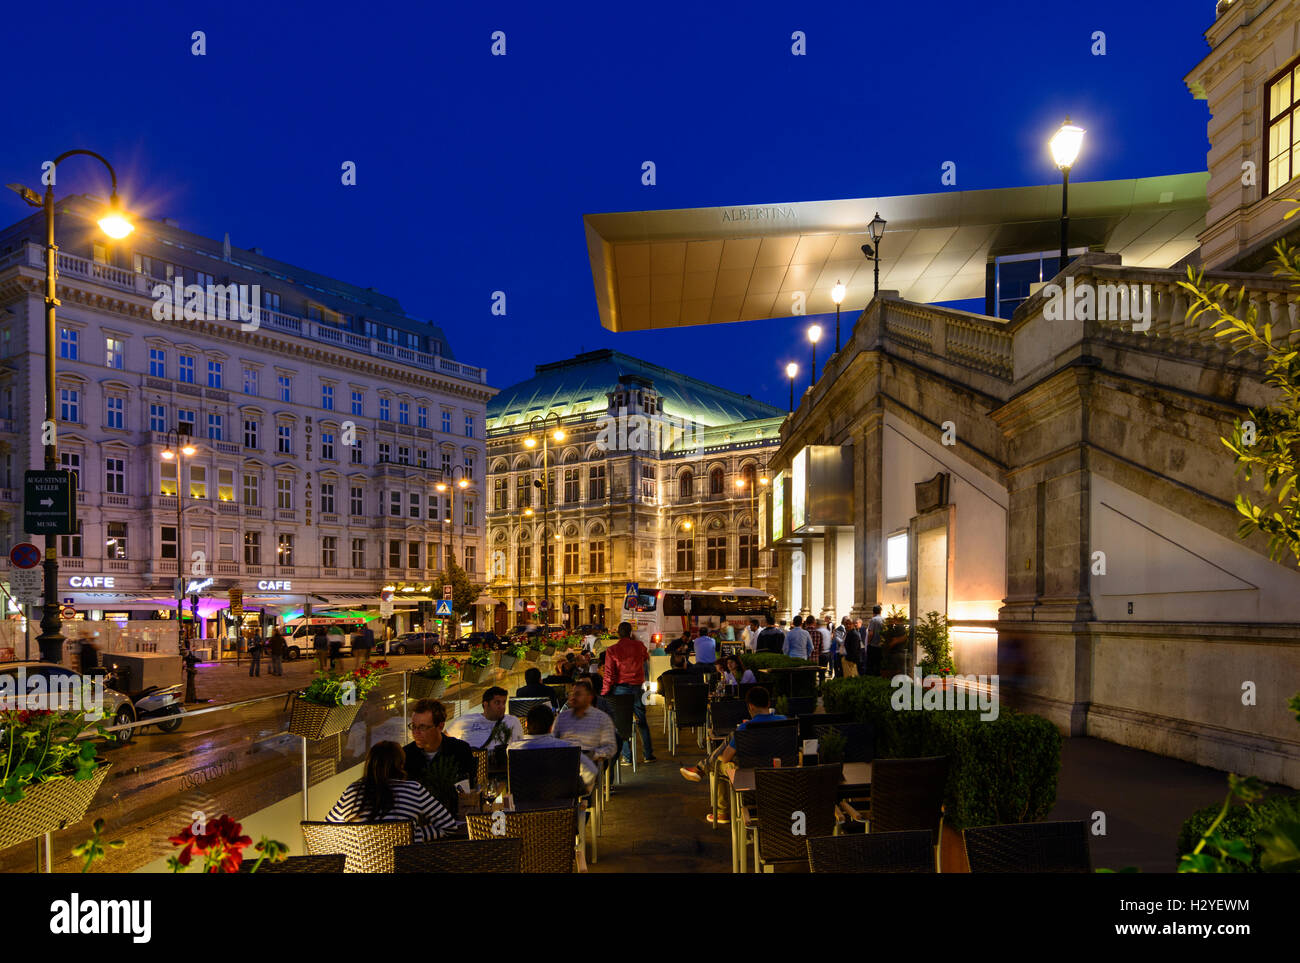 Wien, Vienna: Albertina with flying roof ' Soravia Wing ' by Hans Hollein , views to the Opera and street restaurant, 01., Wien, Stock Photo